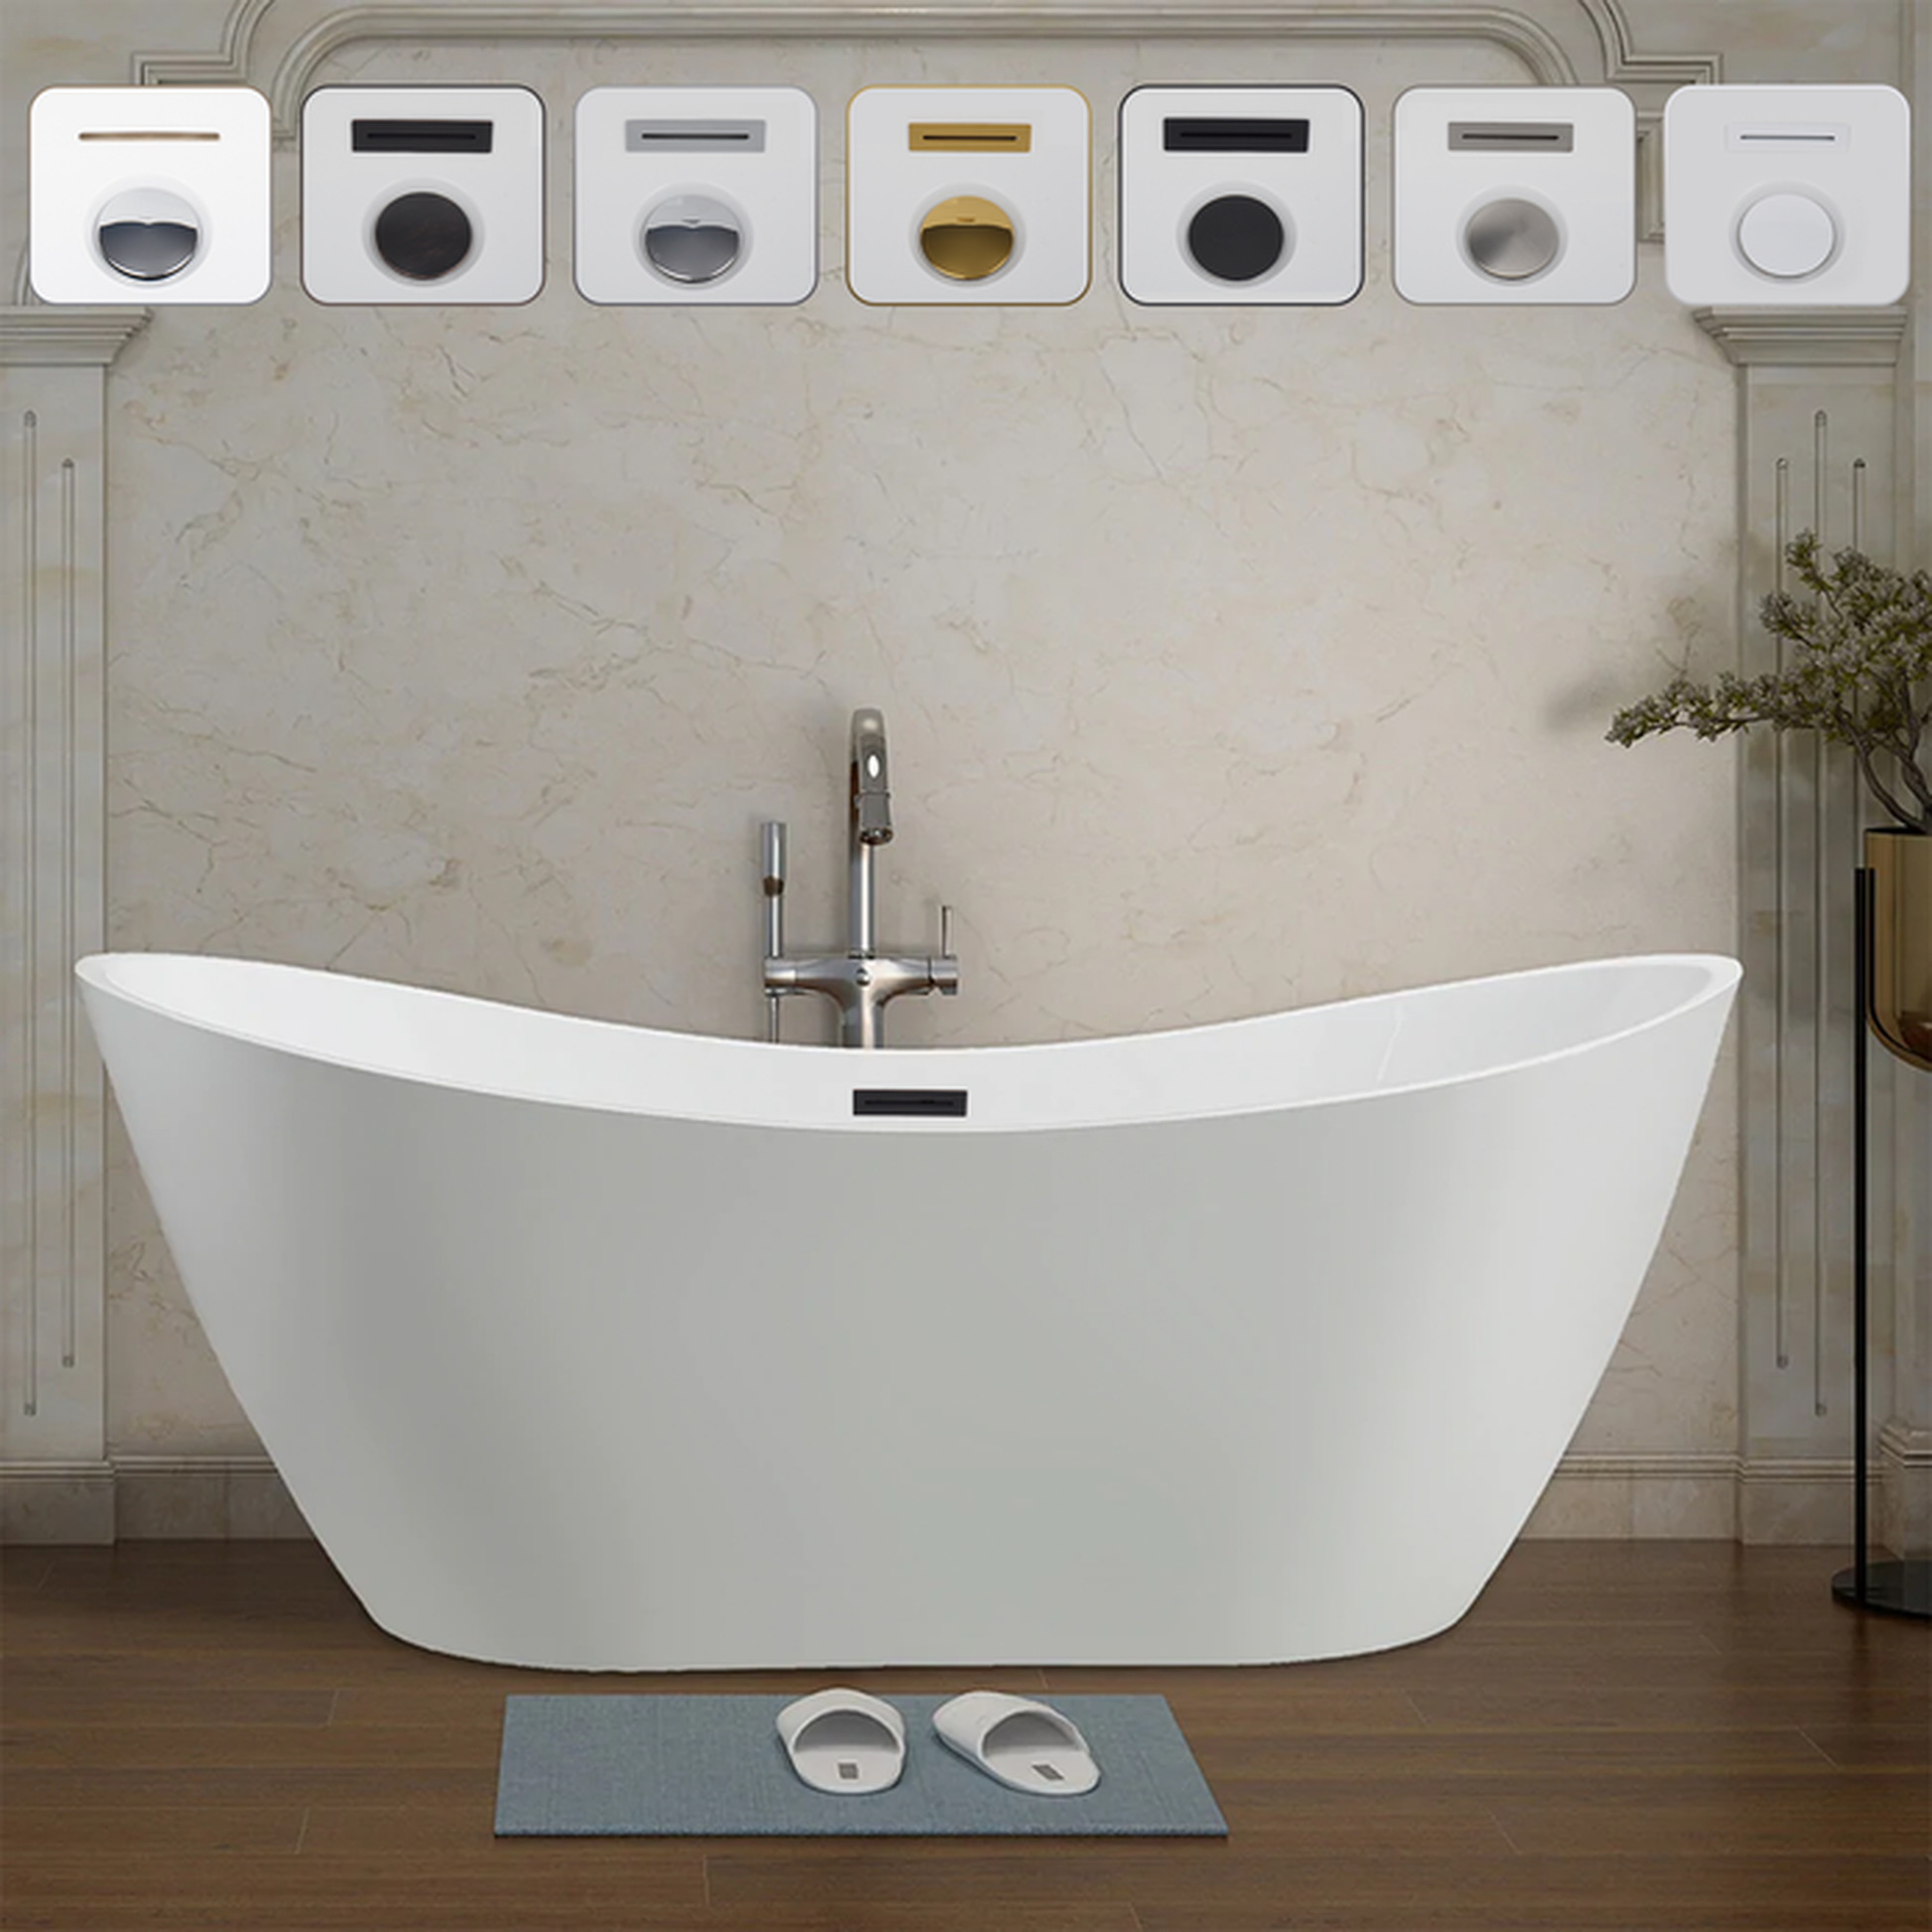 Vanity Art 71" W x 28" H White Acrylic Freestanding Bathtub With Oil Rubbed Bronze Pop-up Drain, Slotted Overflow and Flexible Drain Hose